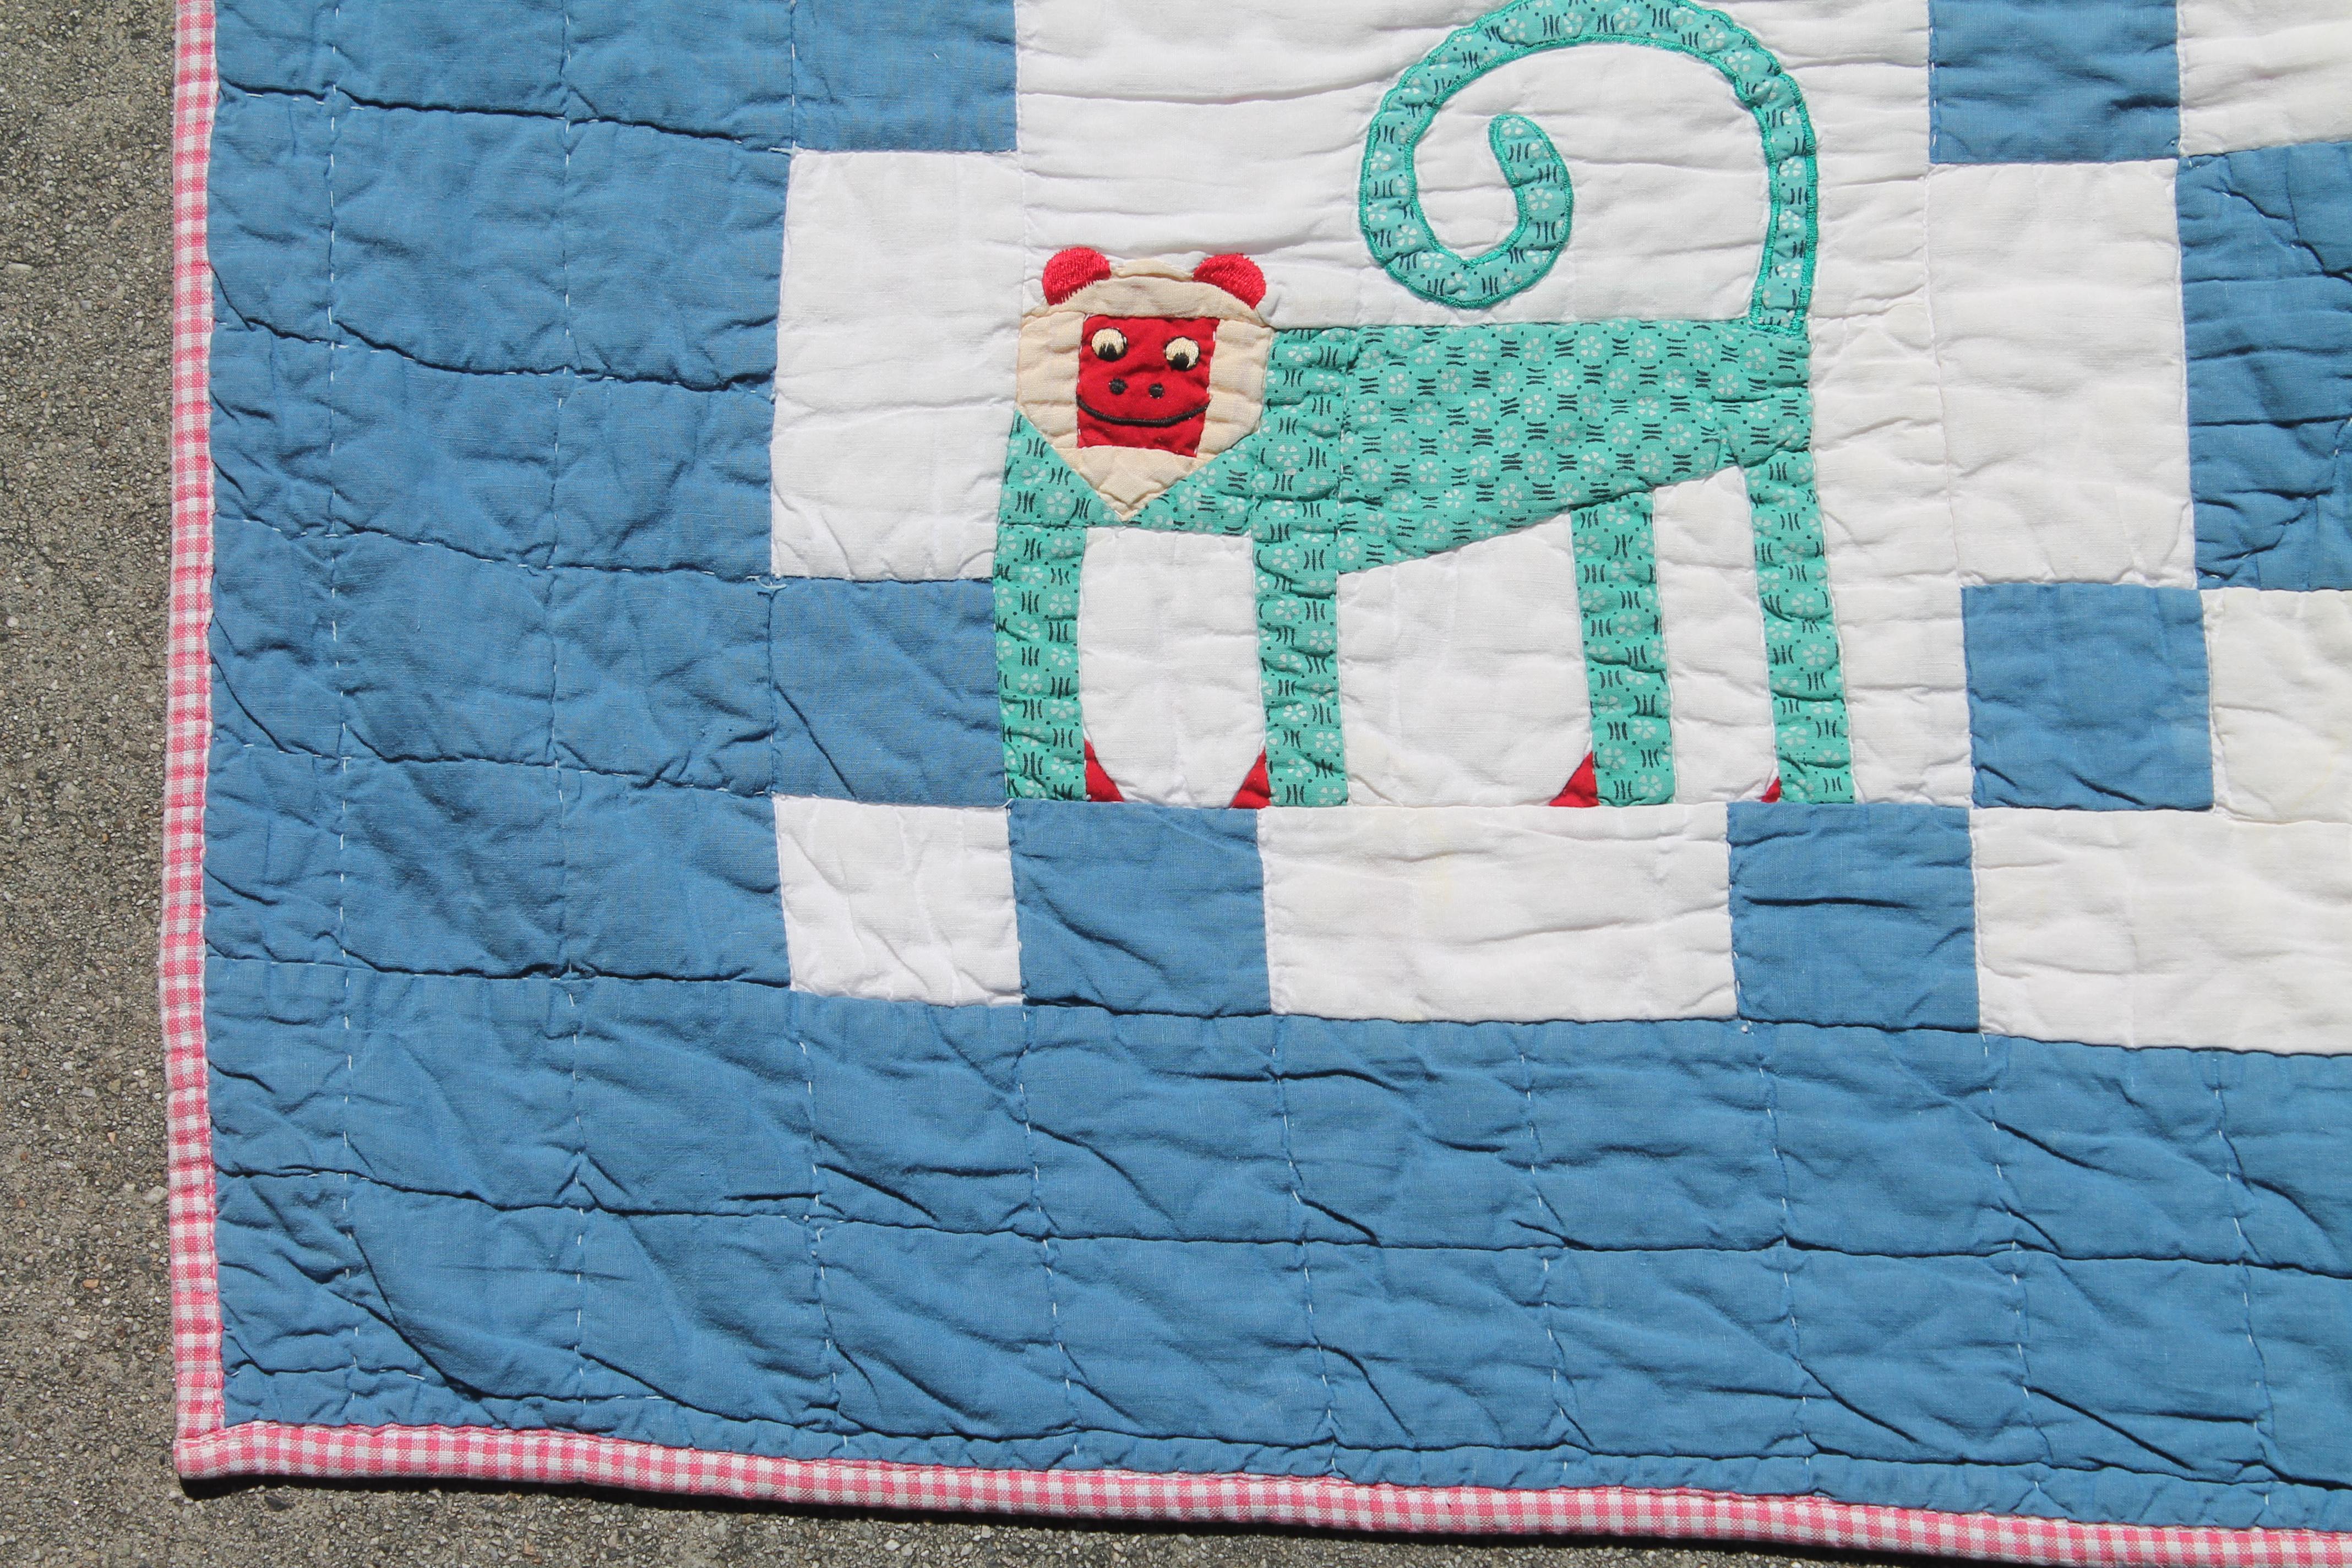 Vintage pictorial crib quilt with applique animals. Blue and white background and red and white check backing.